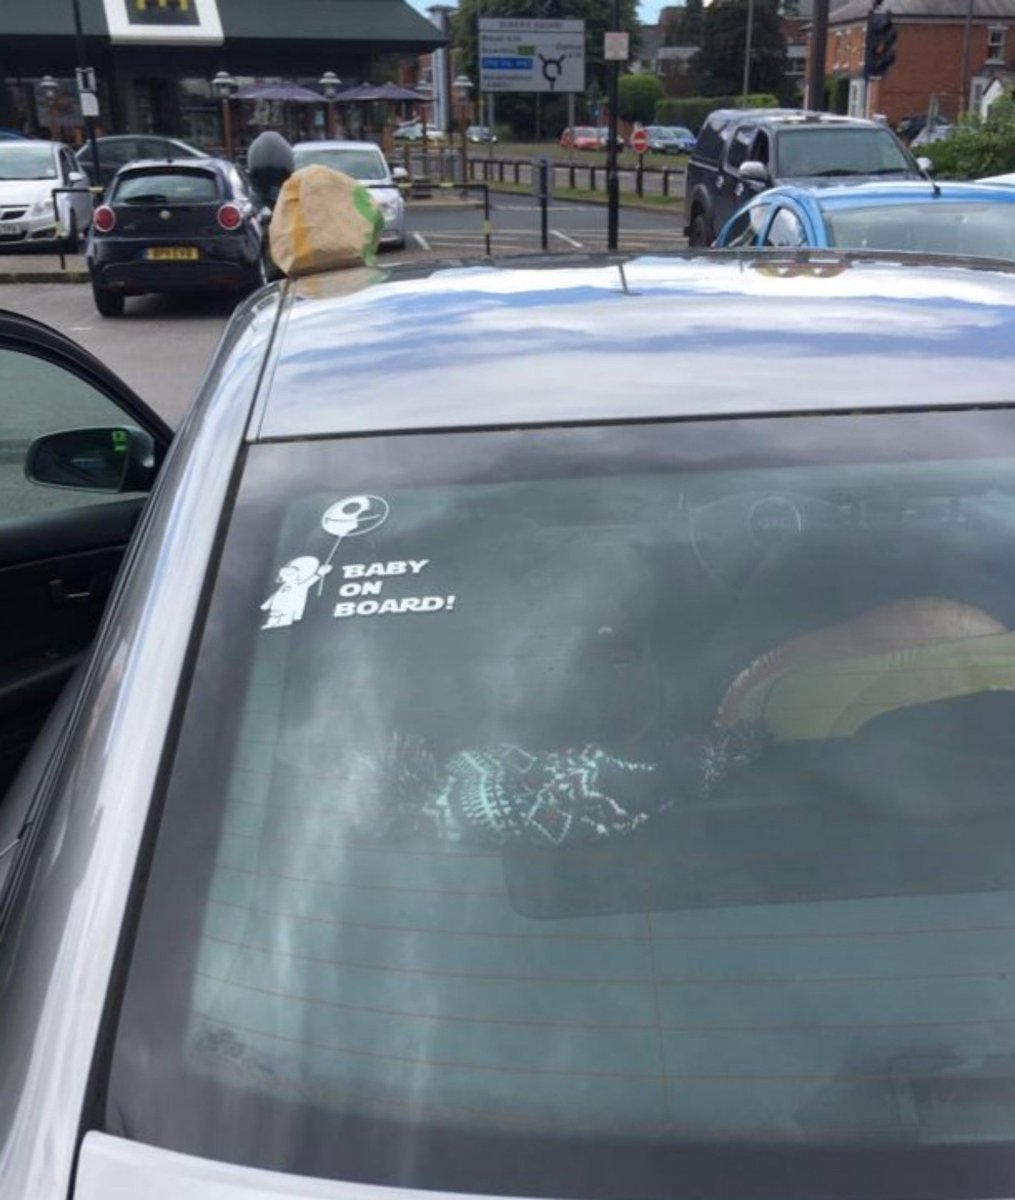 #spotted 👮Driver parked in McDonalds carpark smoking spliff, intending to drive his 3yr old home. Drug driving impairs judgement of time, distance & coordination 🥴🚫🚗*Relative collected vehicle* #possession #education #babyonboard #needforweed #dontdrugdrive